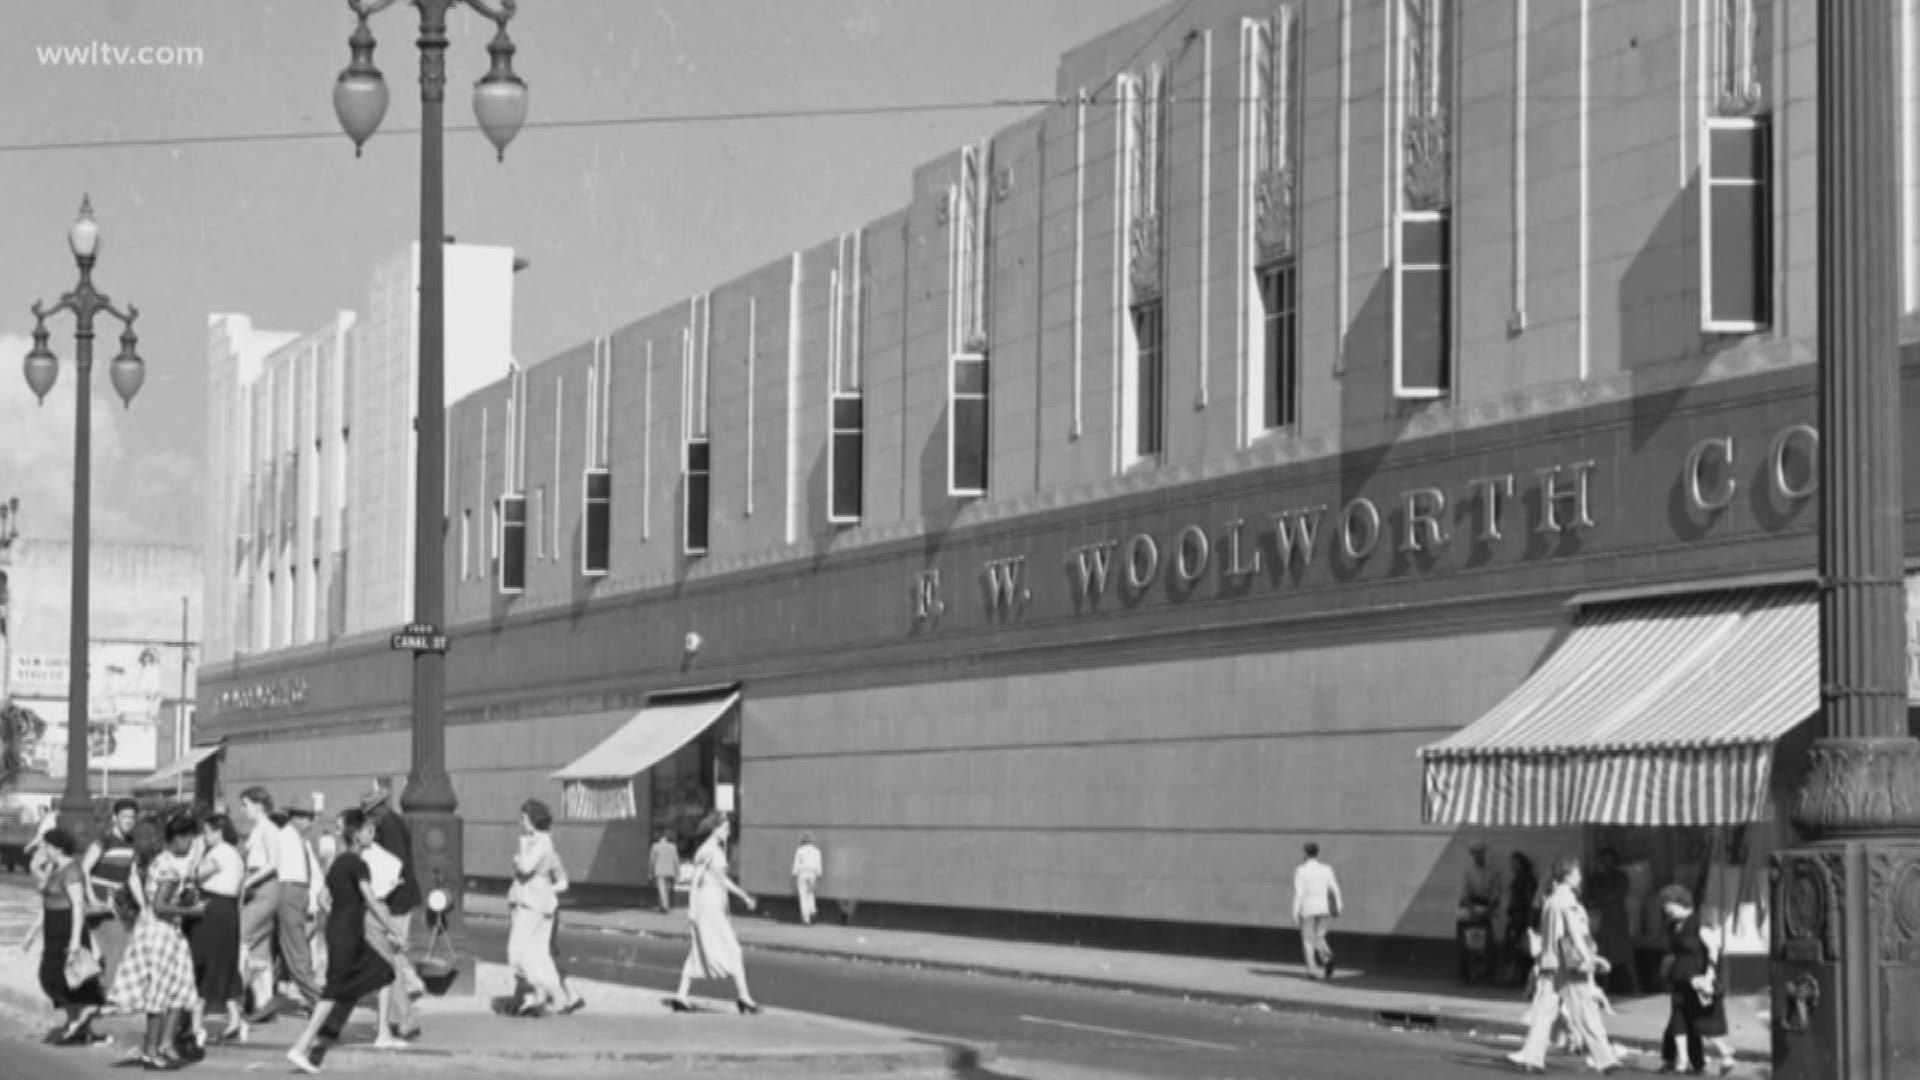 Before the name "Hard Rock" was ever attached, the collapse site in New Orleans was the old Woolworth's building.